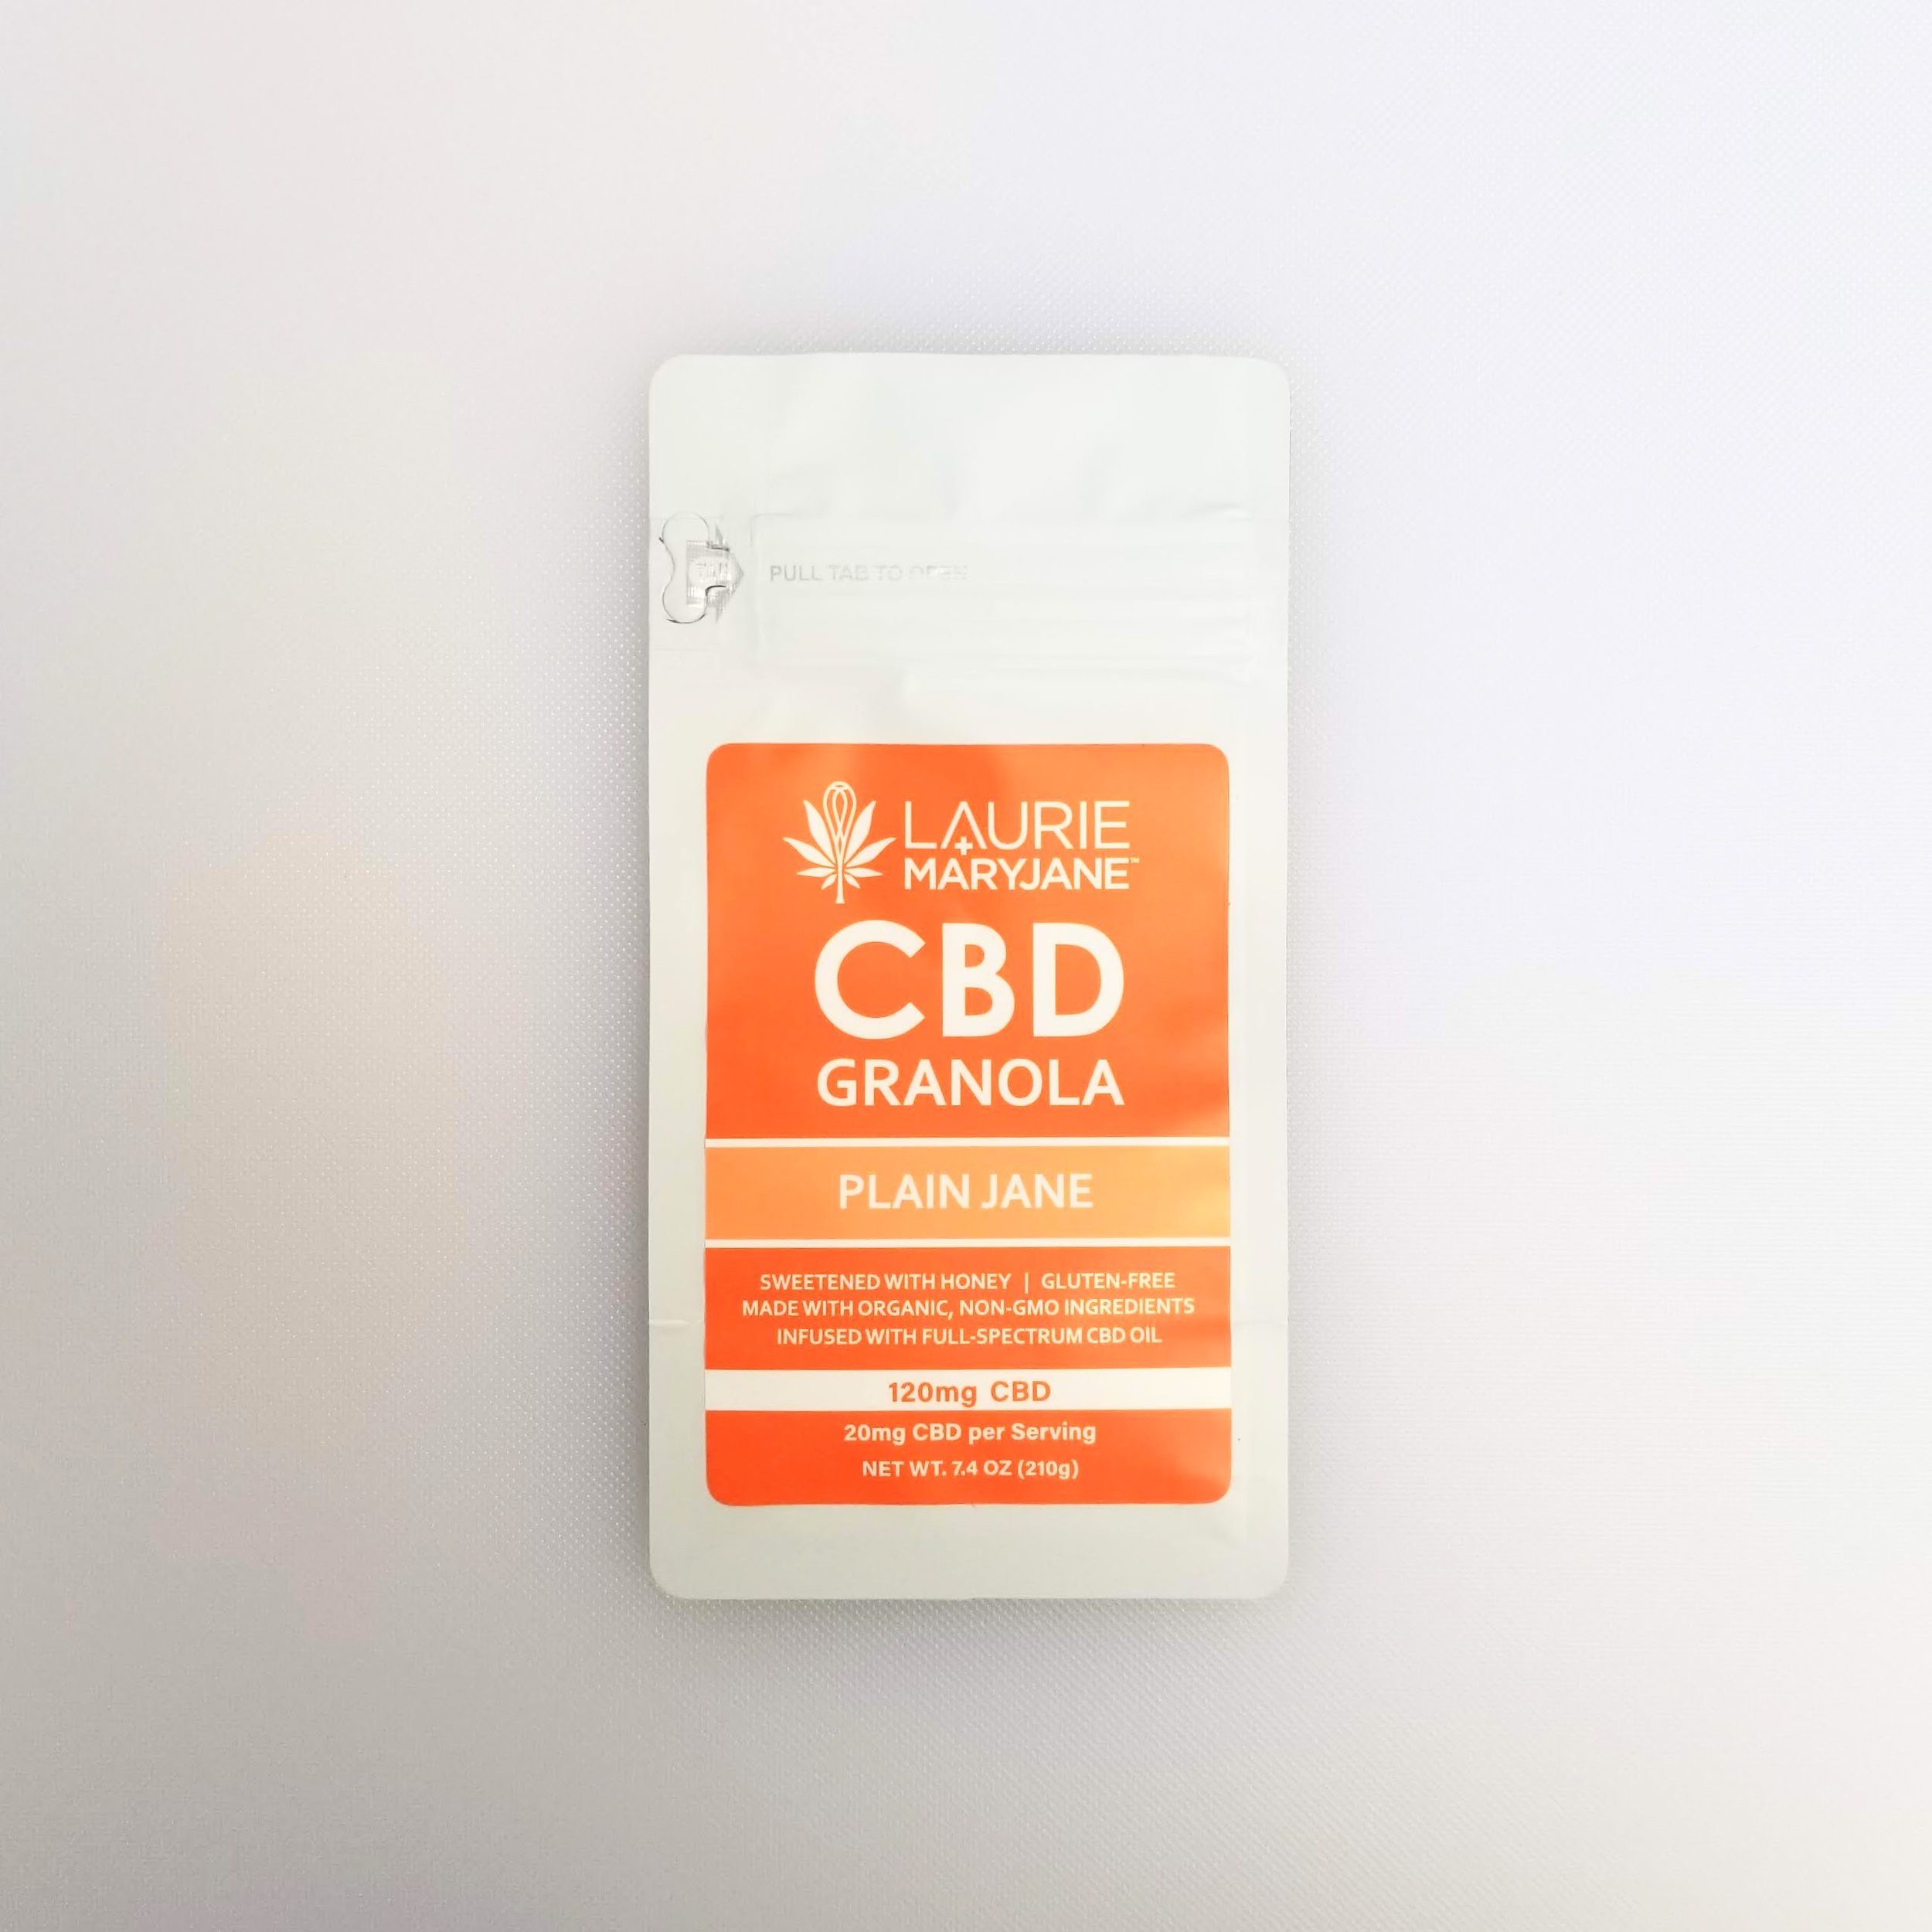 Plain Jane Introduces Their Online Wholesale CBD to the Marketplace